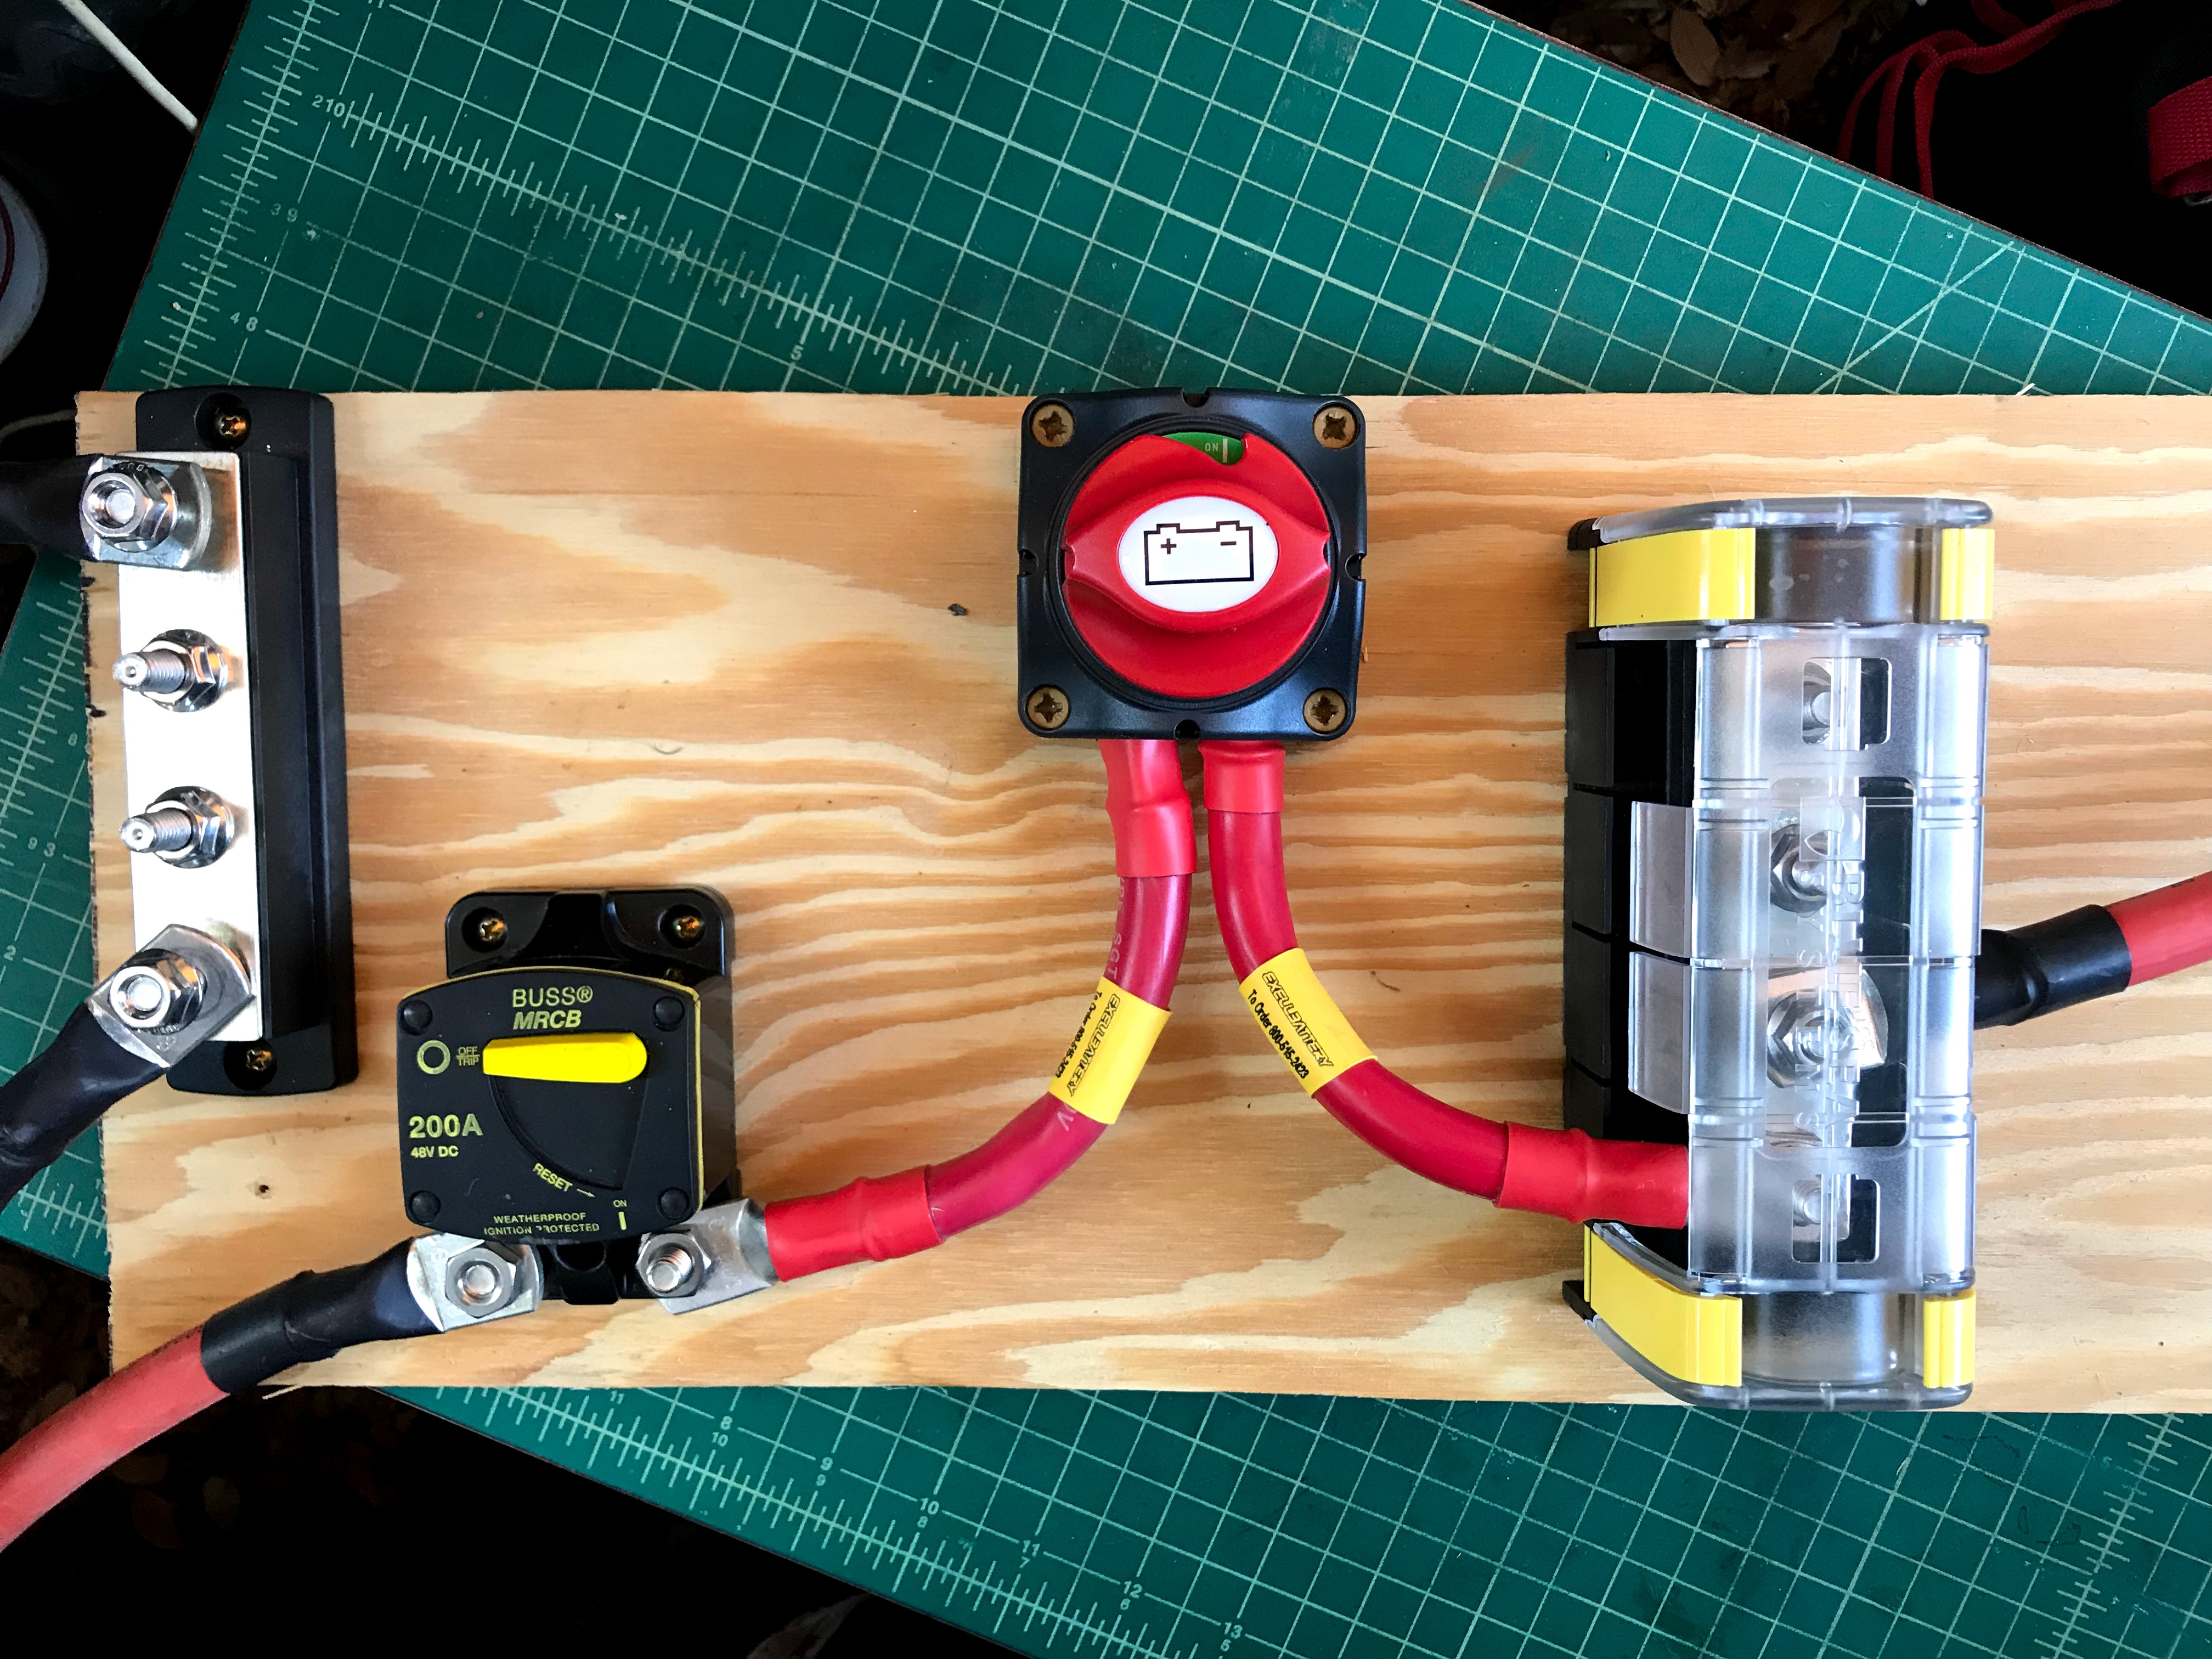 A  four post negative bus bar, 200 amp circuit breaker, battery cutoff switch, and 4 post positive bus bar with plastic cover are arranged left-to-right on and secured to a piece of plywood. Heavy 2/0 wires run between them. Red positive wires run to and from the breaker, cuttoff switch, and positive bus bar. Black negative wires run to the negative bus bar.